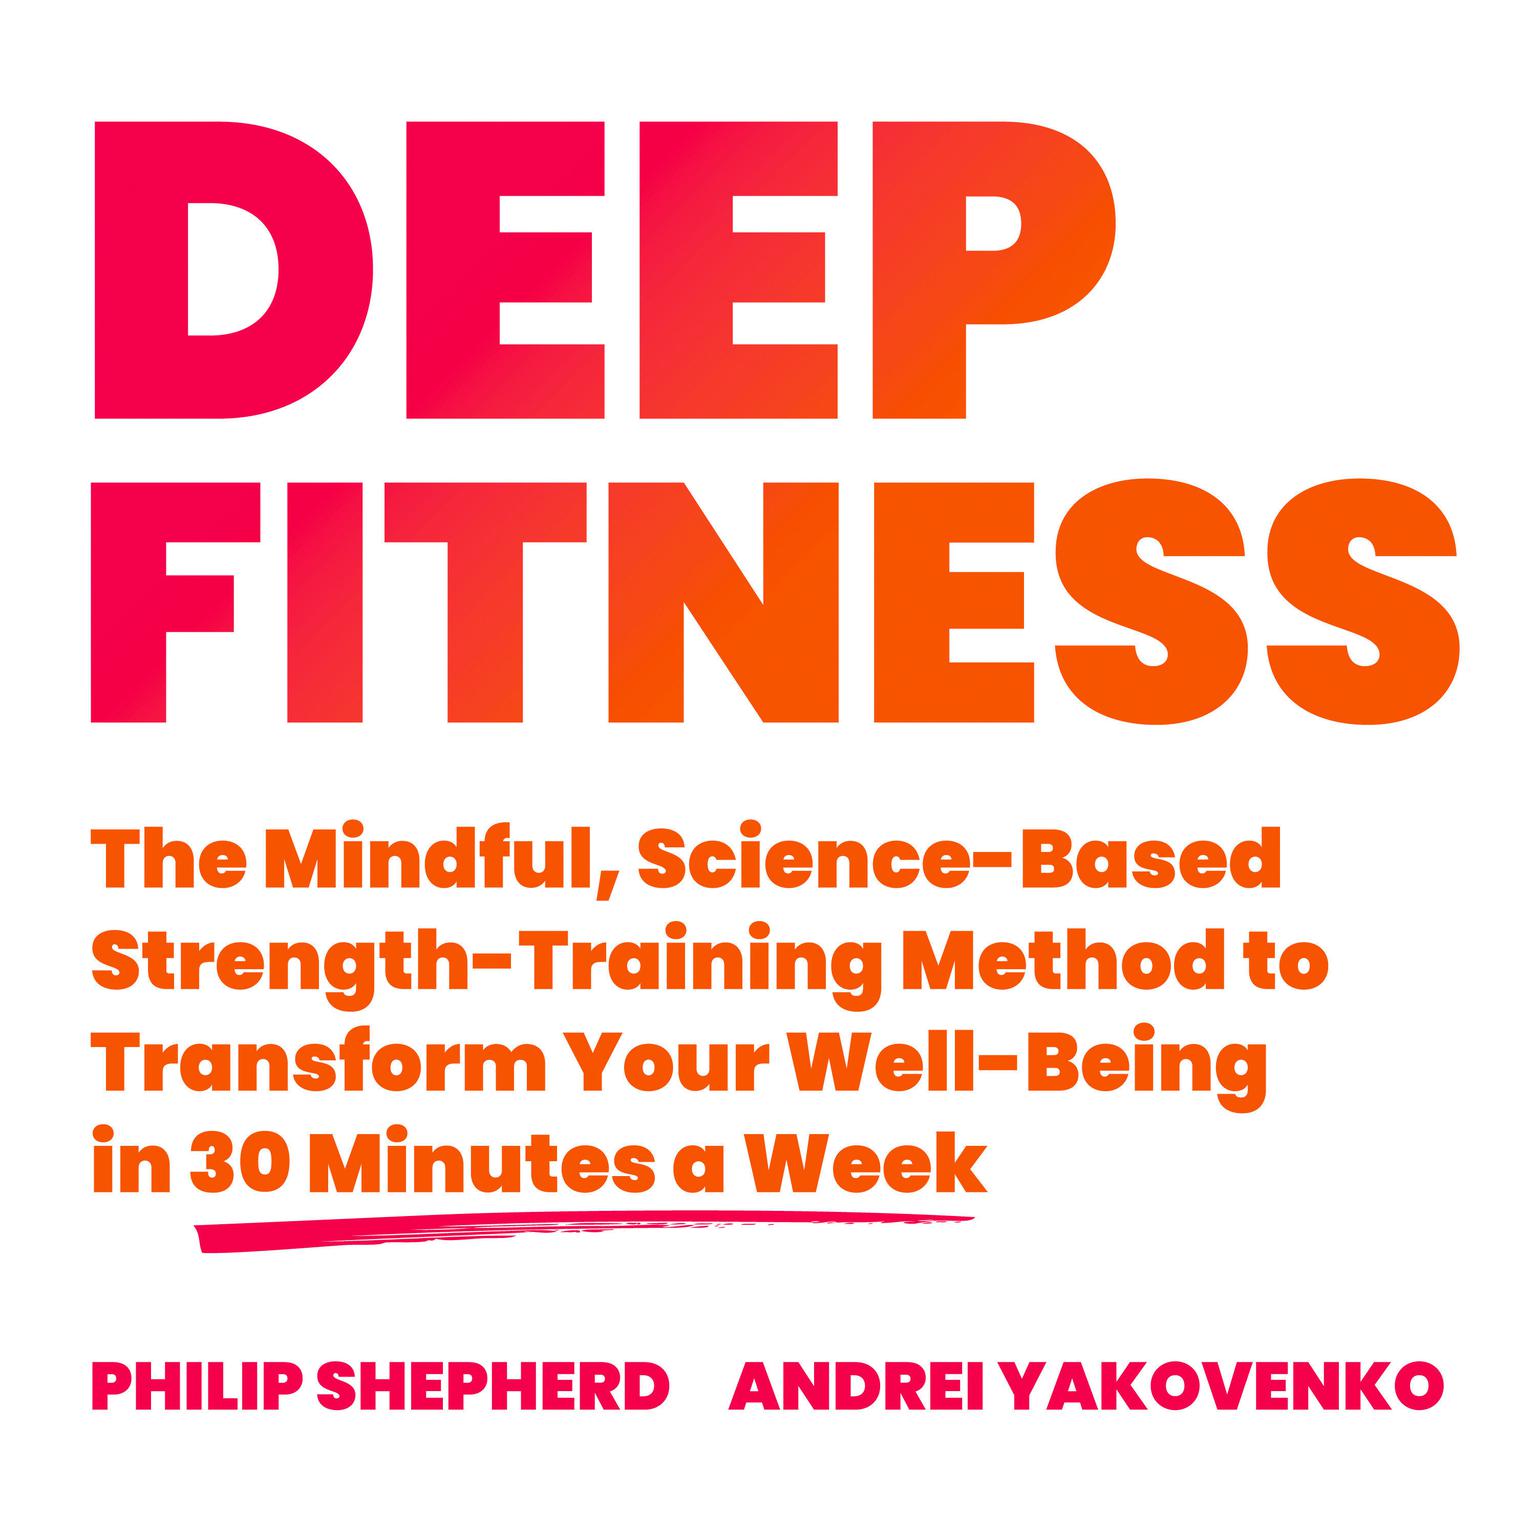 Deep Fitness: The Mindful, Science-Based Strength-Training Method to Transform Your Well-Being  in Just 30 Minutes a Week Audiobook, by Philip Shepherd